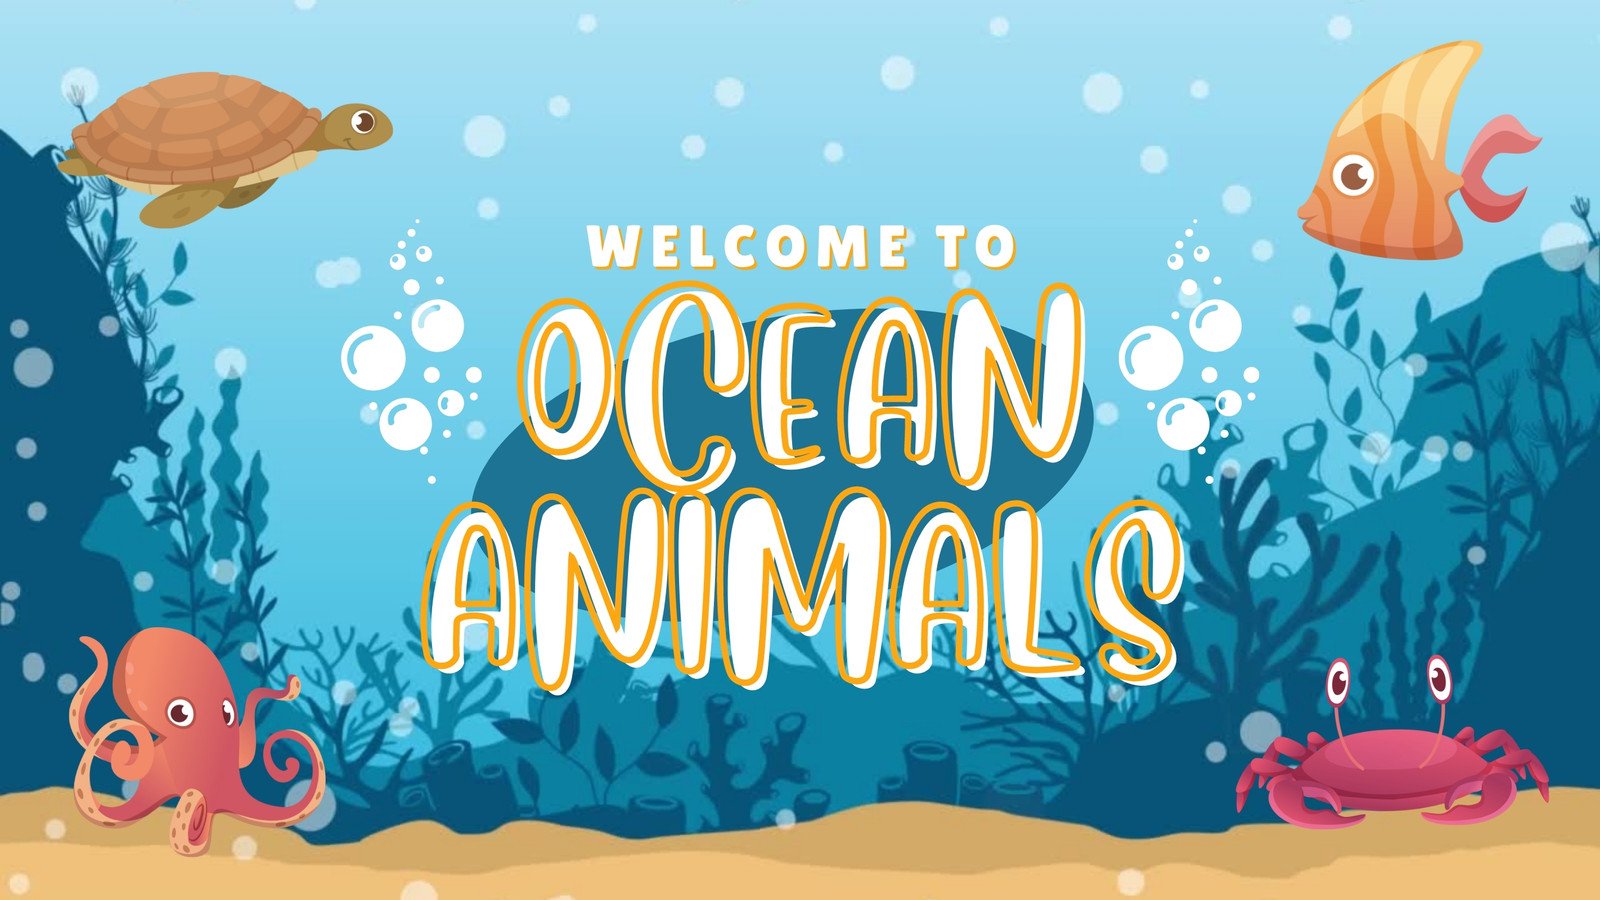 Page 5 - Free and customizable animal templates